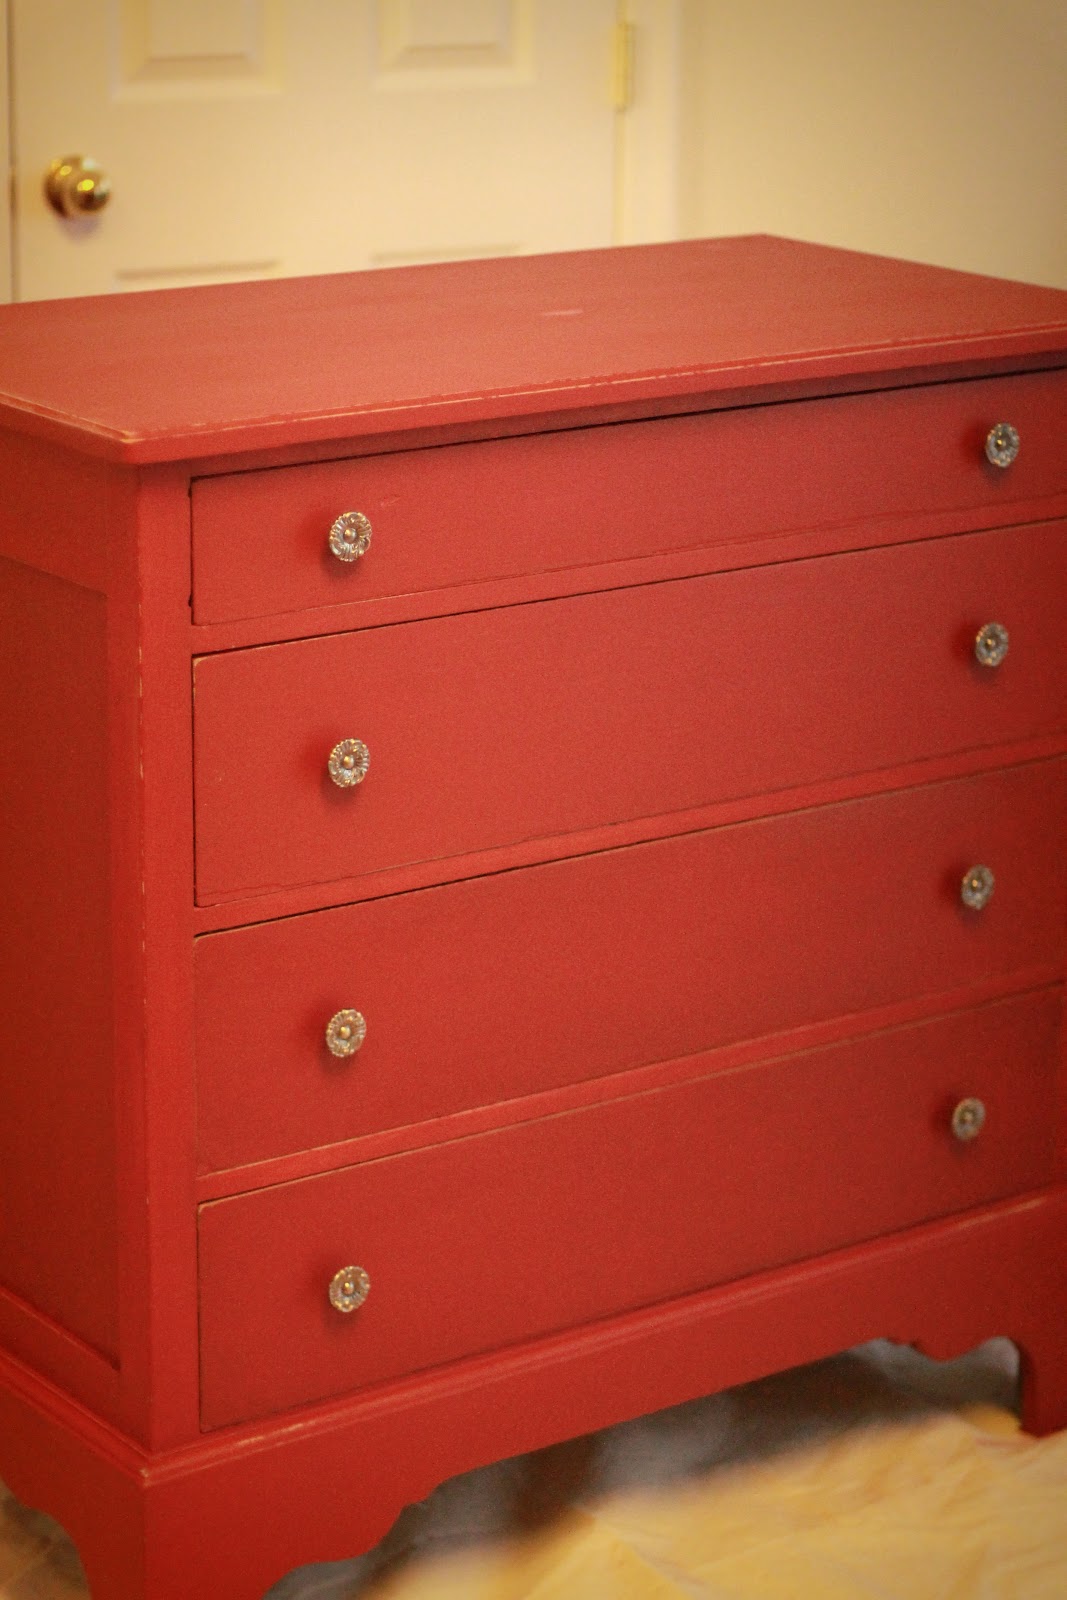 Christy Lately: DIY: Refinish and Distressed Furniture + Chalk Paint!